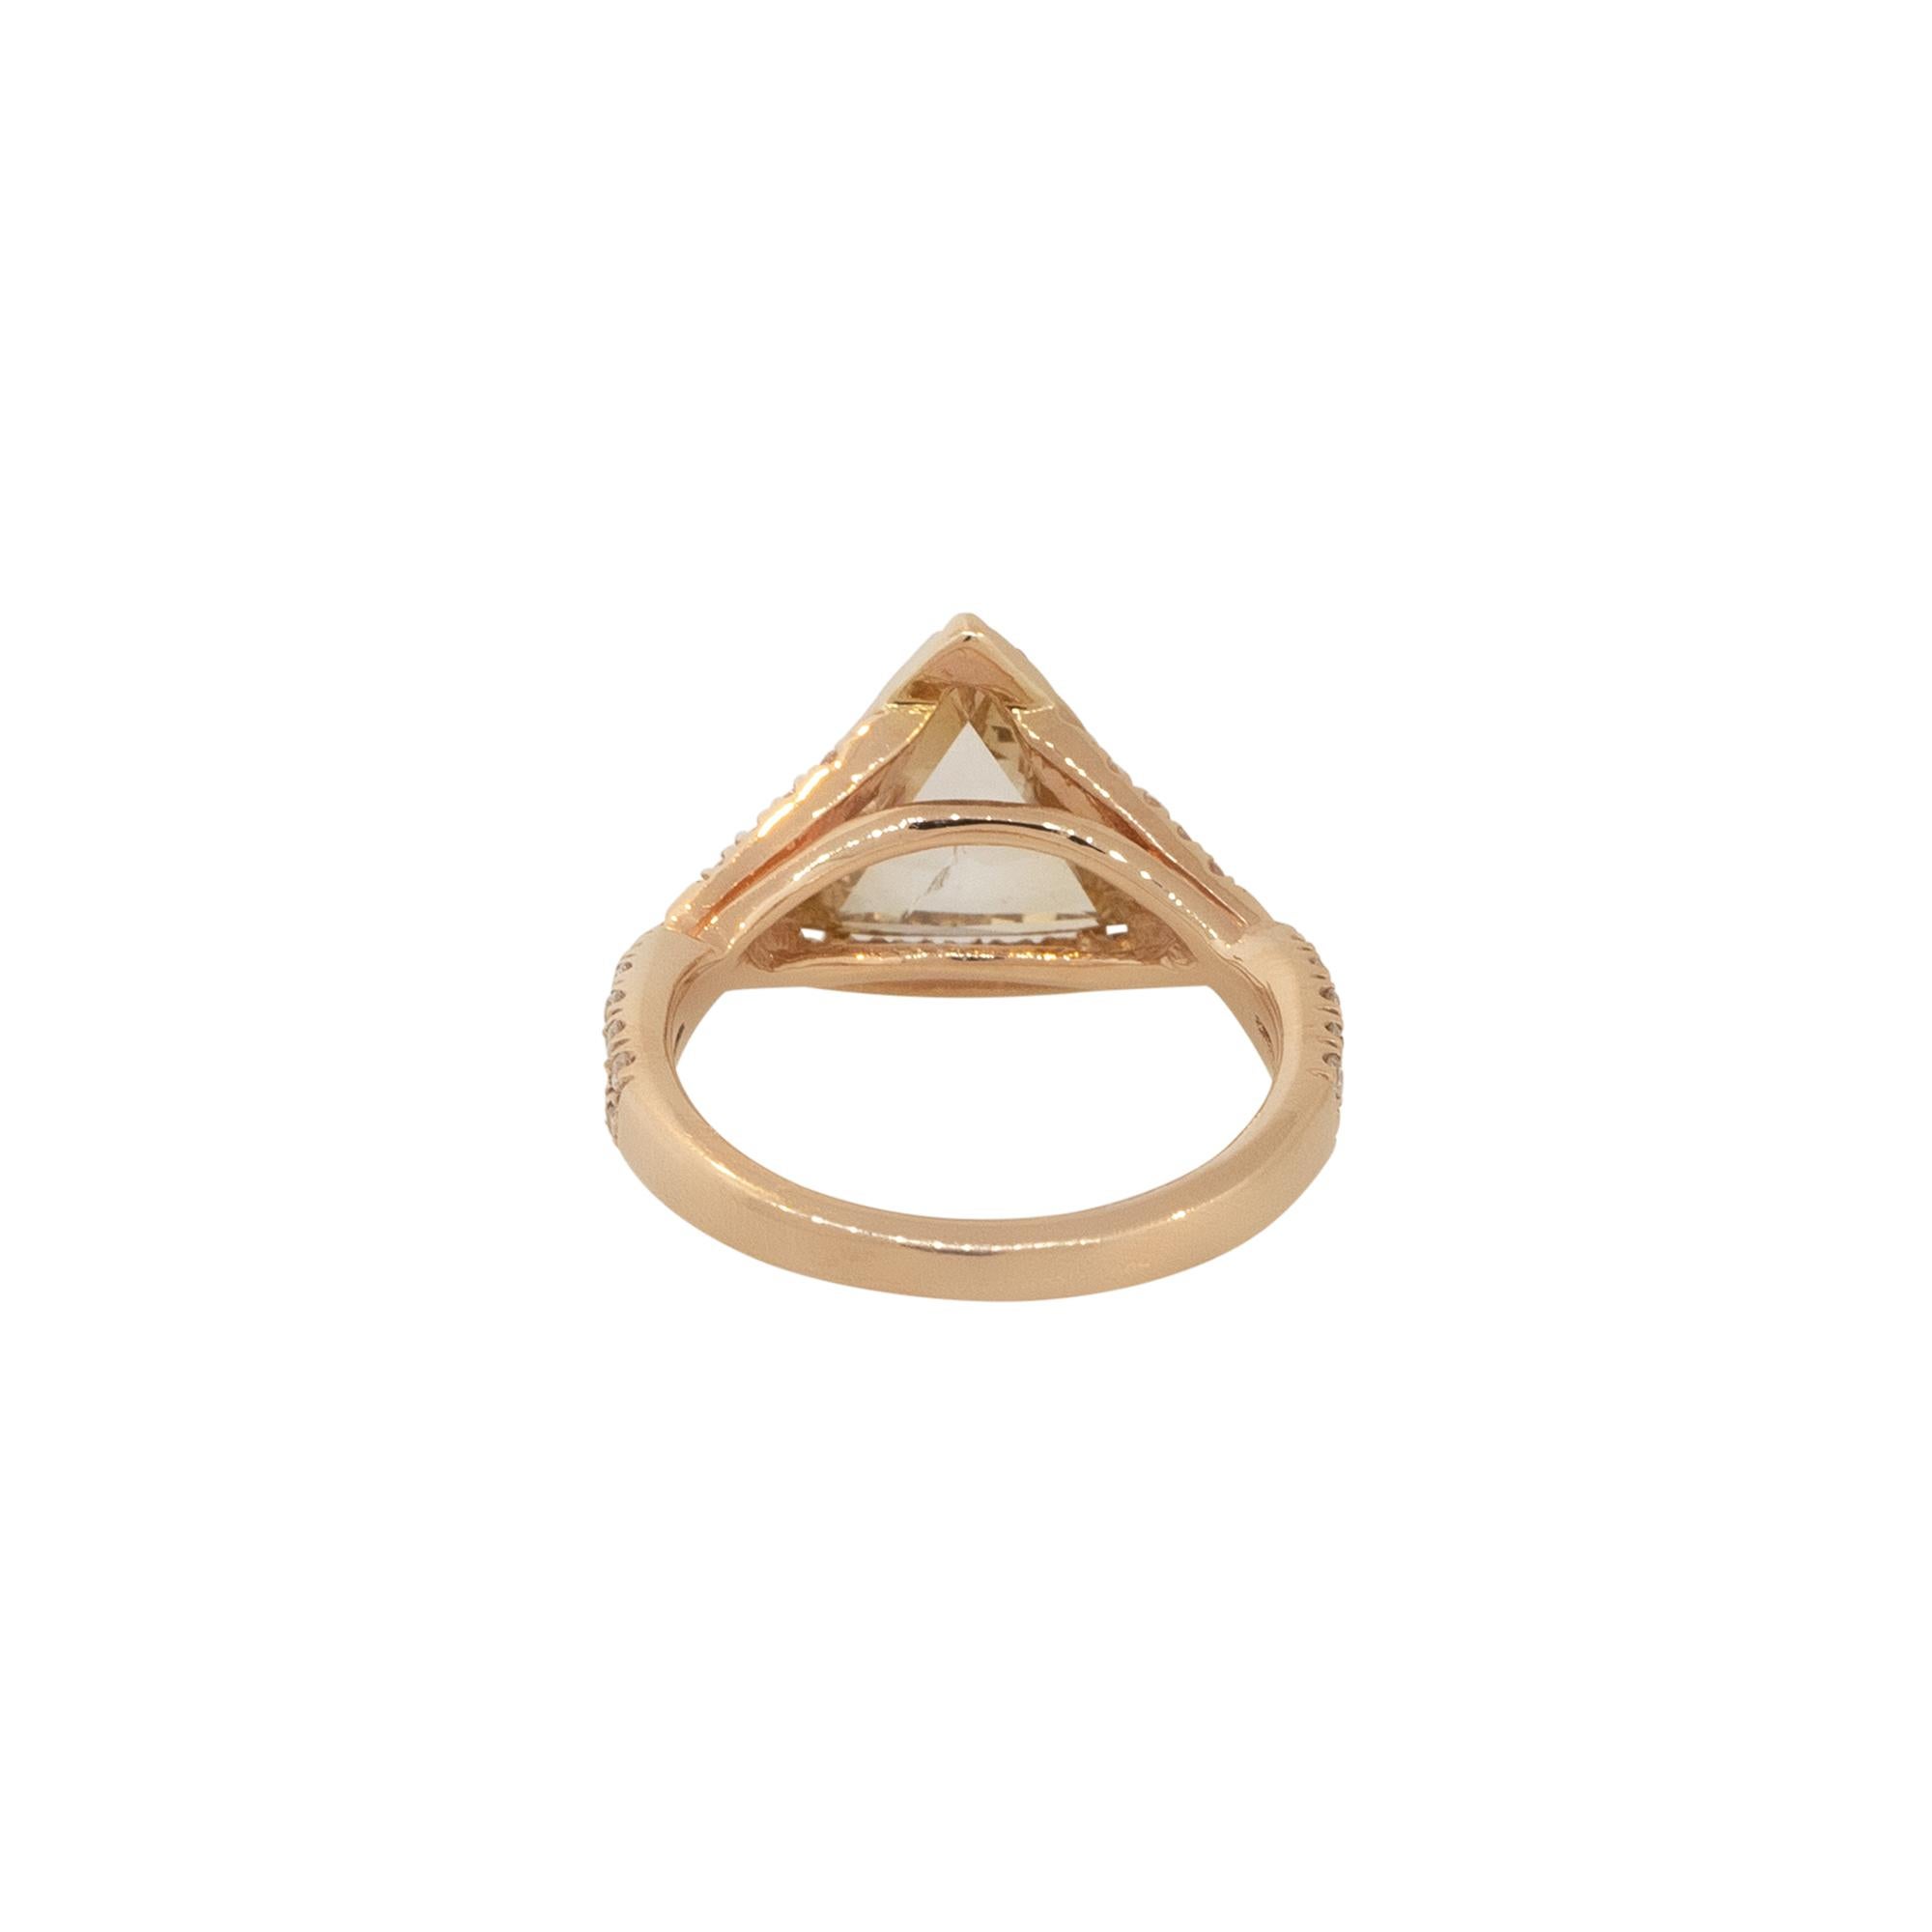 14k Rose Gold 2.67ctw Brown Triangle Diamond Halo Twisted Engagement Ring

Material: 14k Rose Gold
Center Diamond Details: Approx. 2.07ctw Triangle Cut Diamond. Center Diamond is J/K in color and SI2 in clarity
Mounting Details: Approx. 0.60ctw of